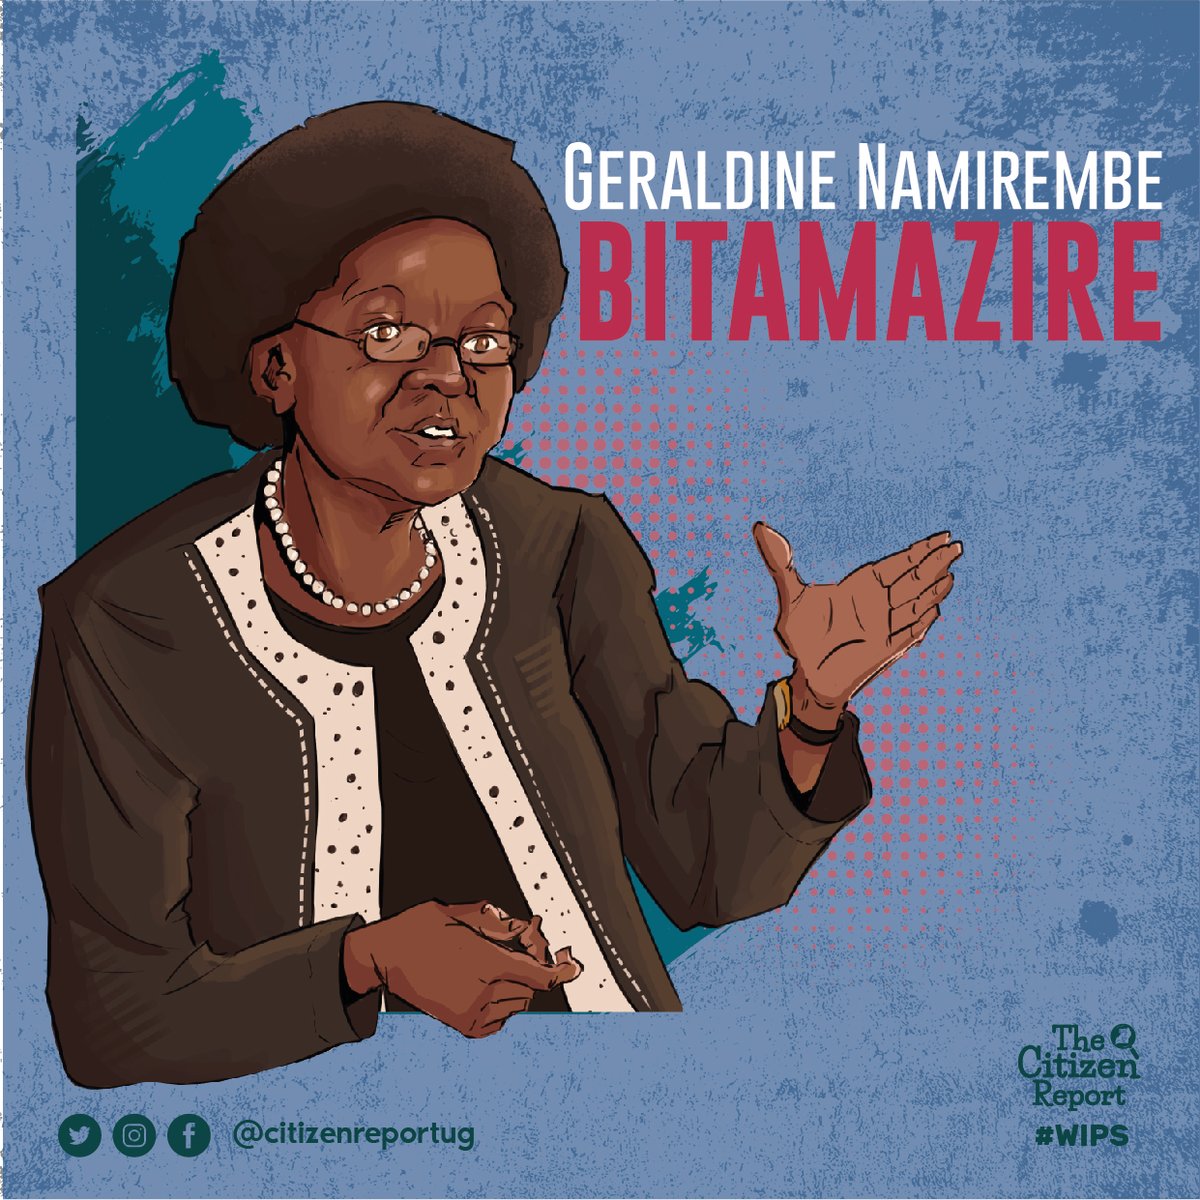 Geraldine Namirembe Bitamazire was born in 1941 in Butambala District. She studied at Trinity College Nabbingo, got a Diploma in Education in 1964, a Bachelor of Arts, and a Master's Degree in Education Management, from Makerere University in 1967 and 1987, respectively. She…